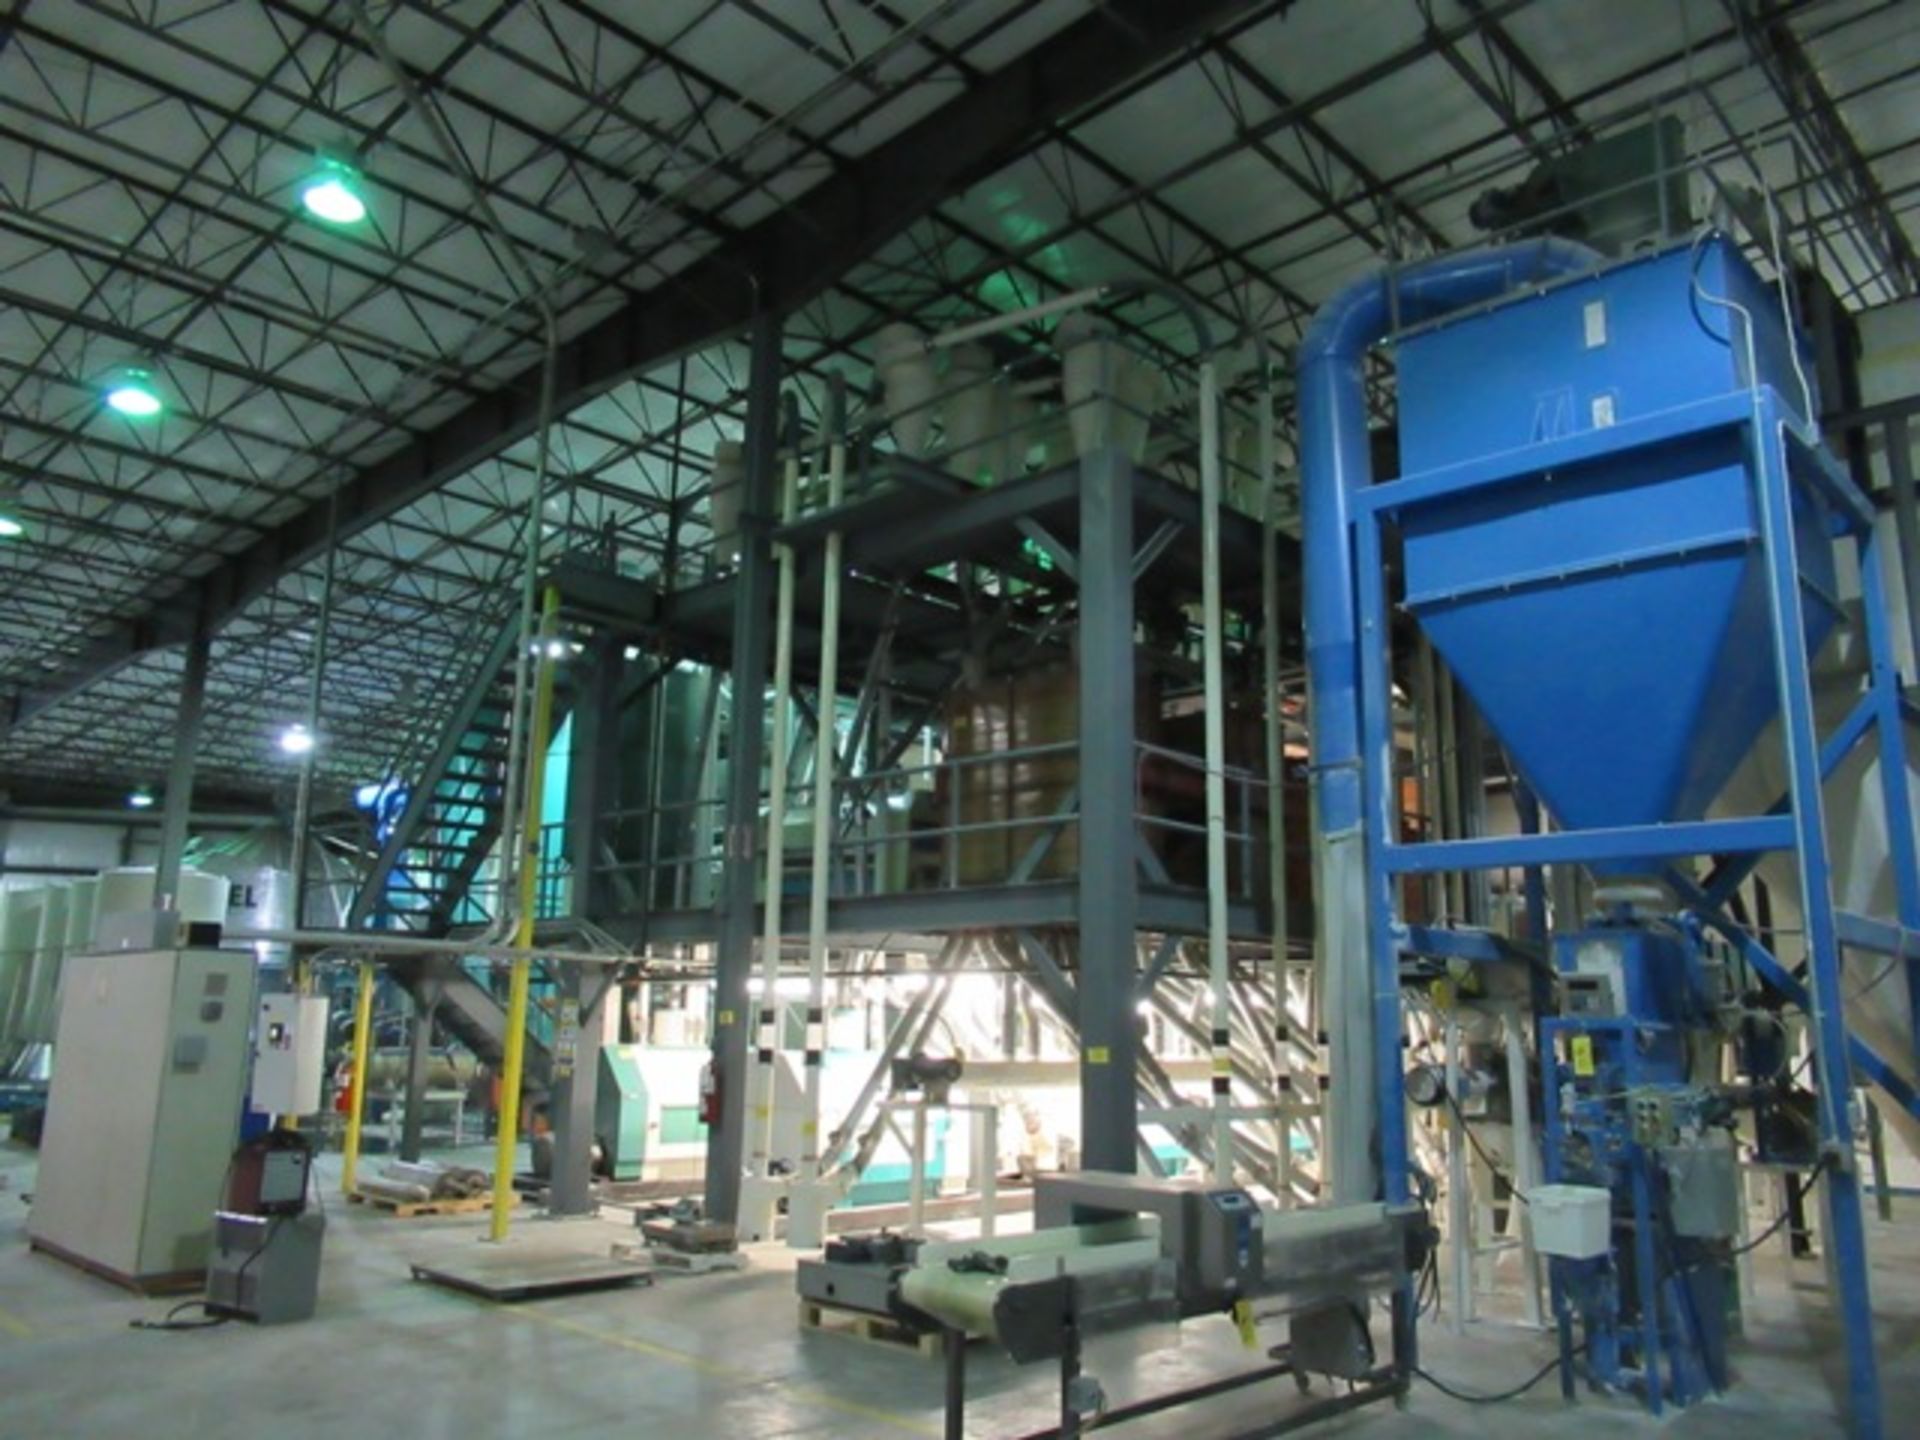 COMPLETE LINE - FLOUR & WHEAT BRAN 100-TON PER DAY CAPACITY MILLING SYSTEM. (CONSISTING OF LOTS